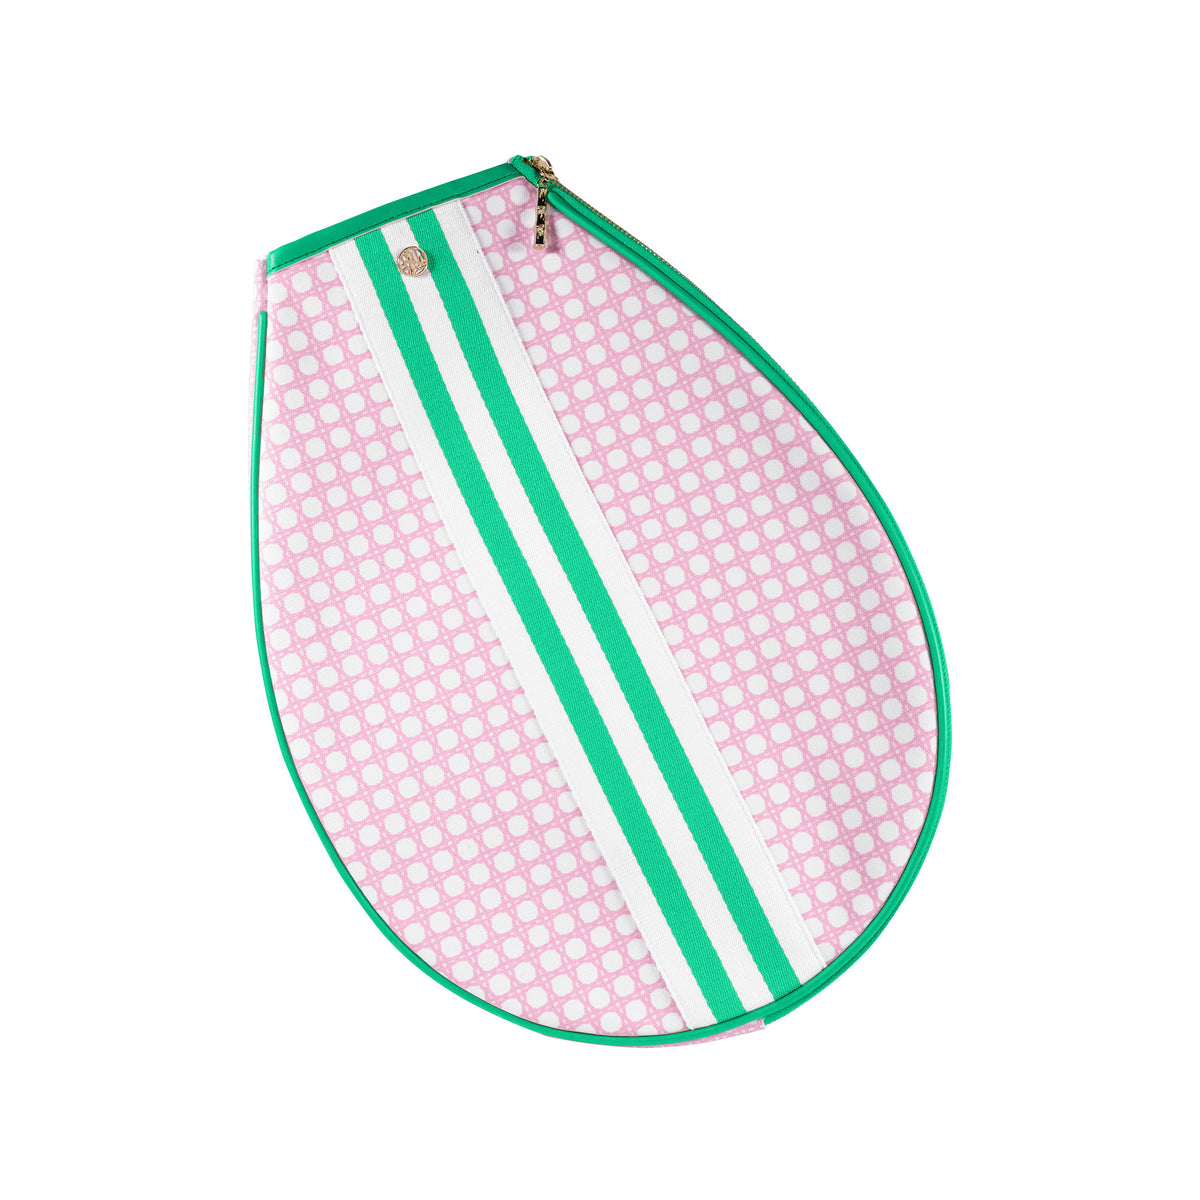 Tennis Tote by Lilly Pulitzer - The Preppy Bunny